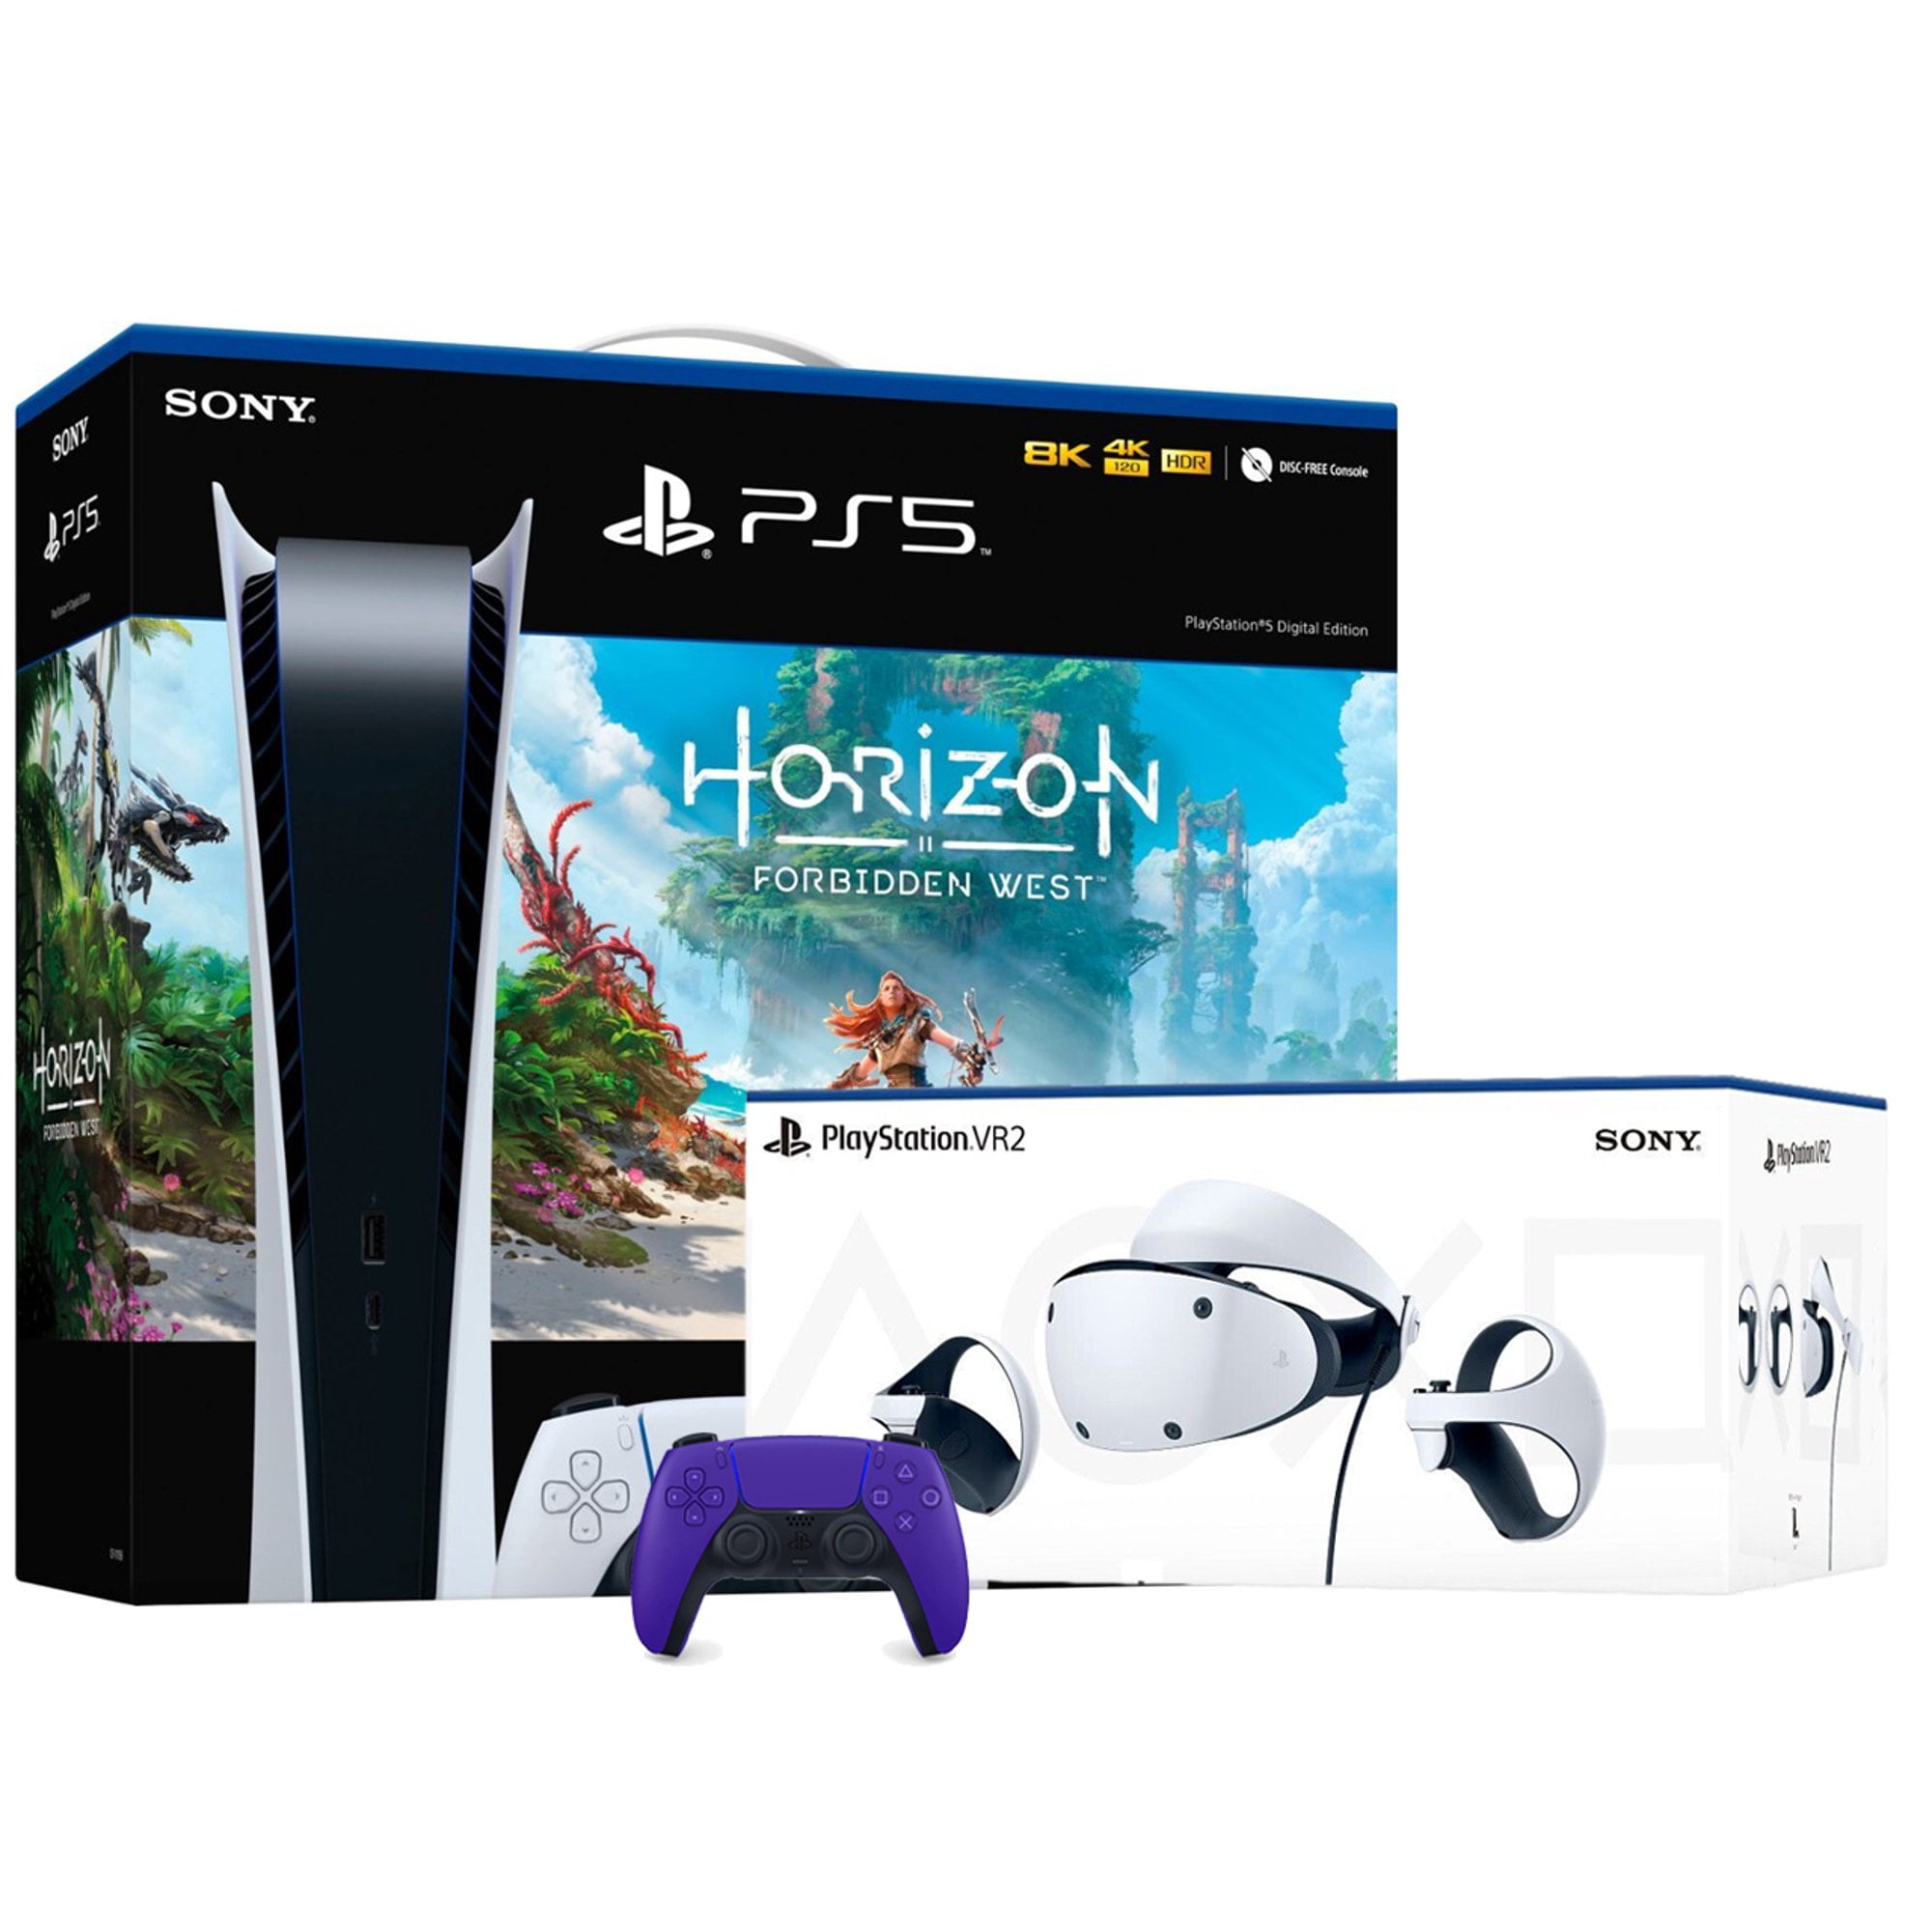 PlayStation VR2 and PlayStation_PS5 Video Game Console (Disc Edition) –  Horizon Forbidden West Bundle–with Extra White Dualsense Controller